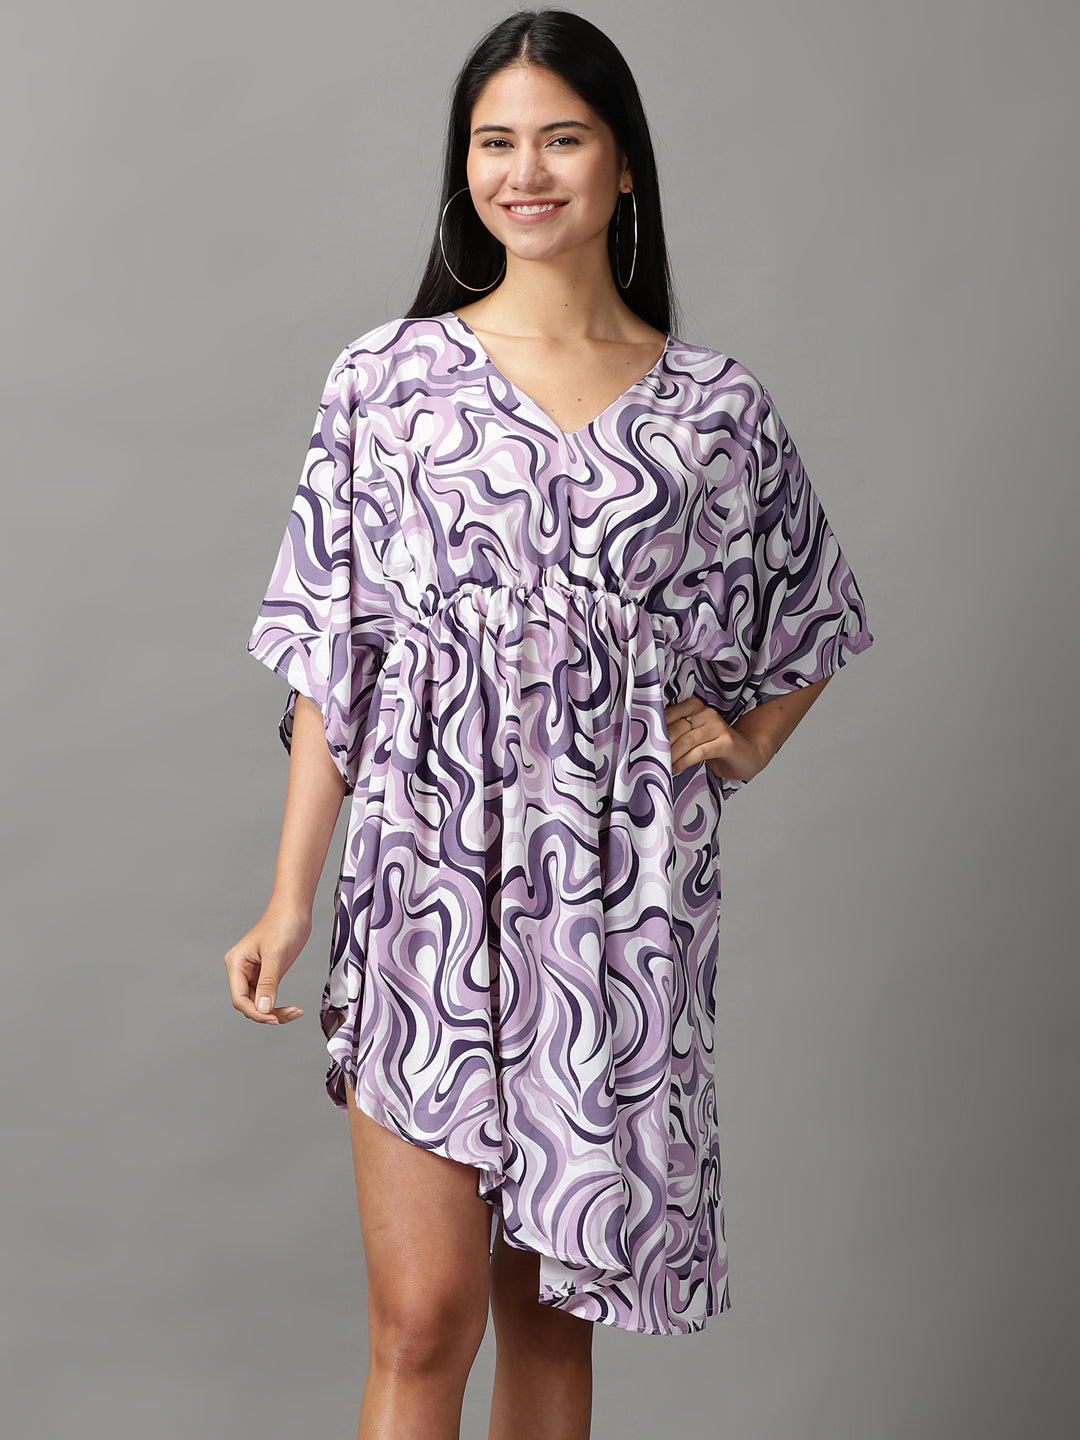 Women's Lavender Printed Fit and Flare Dress